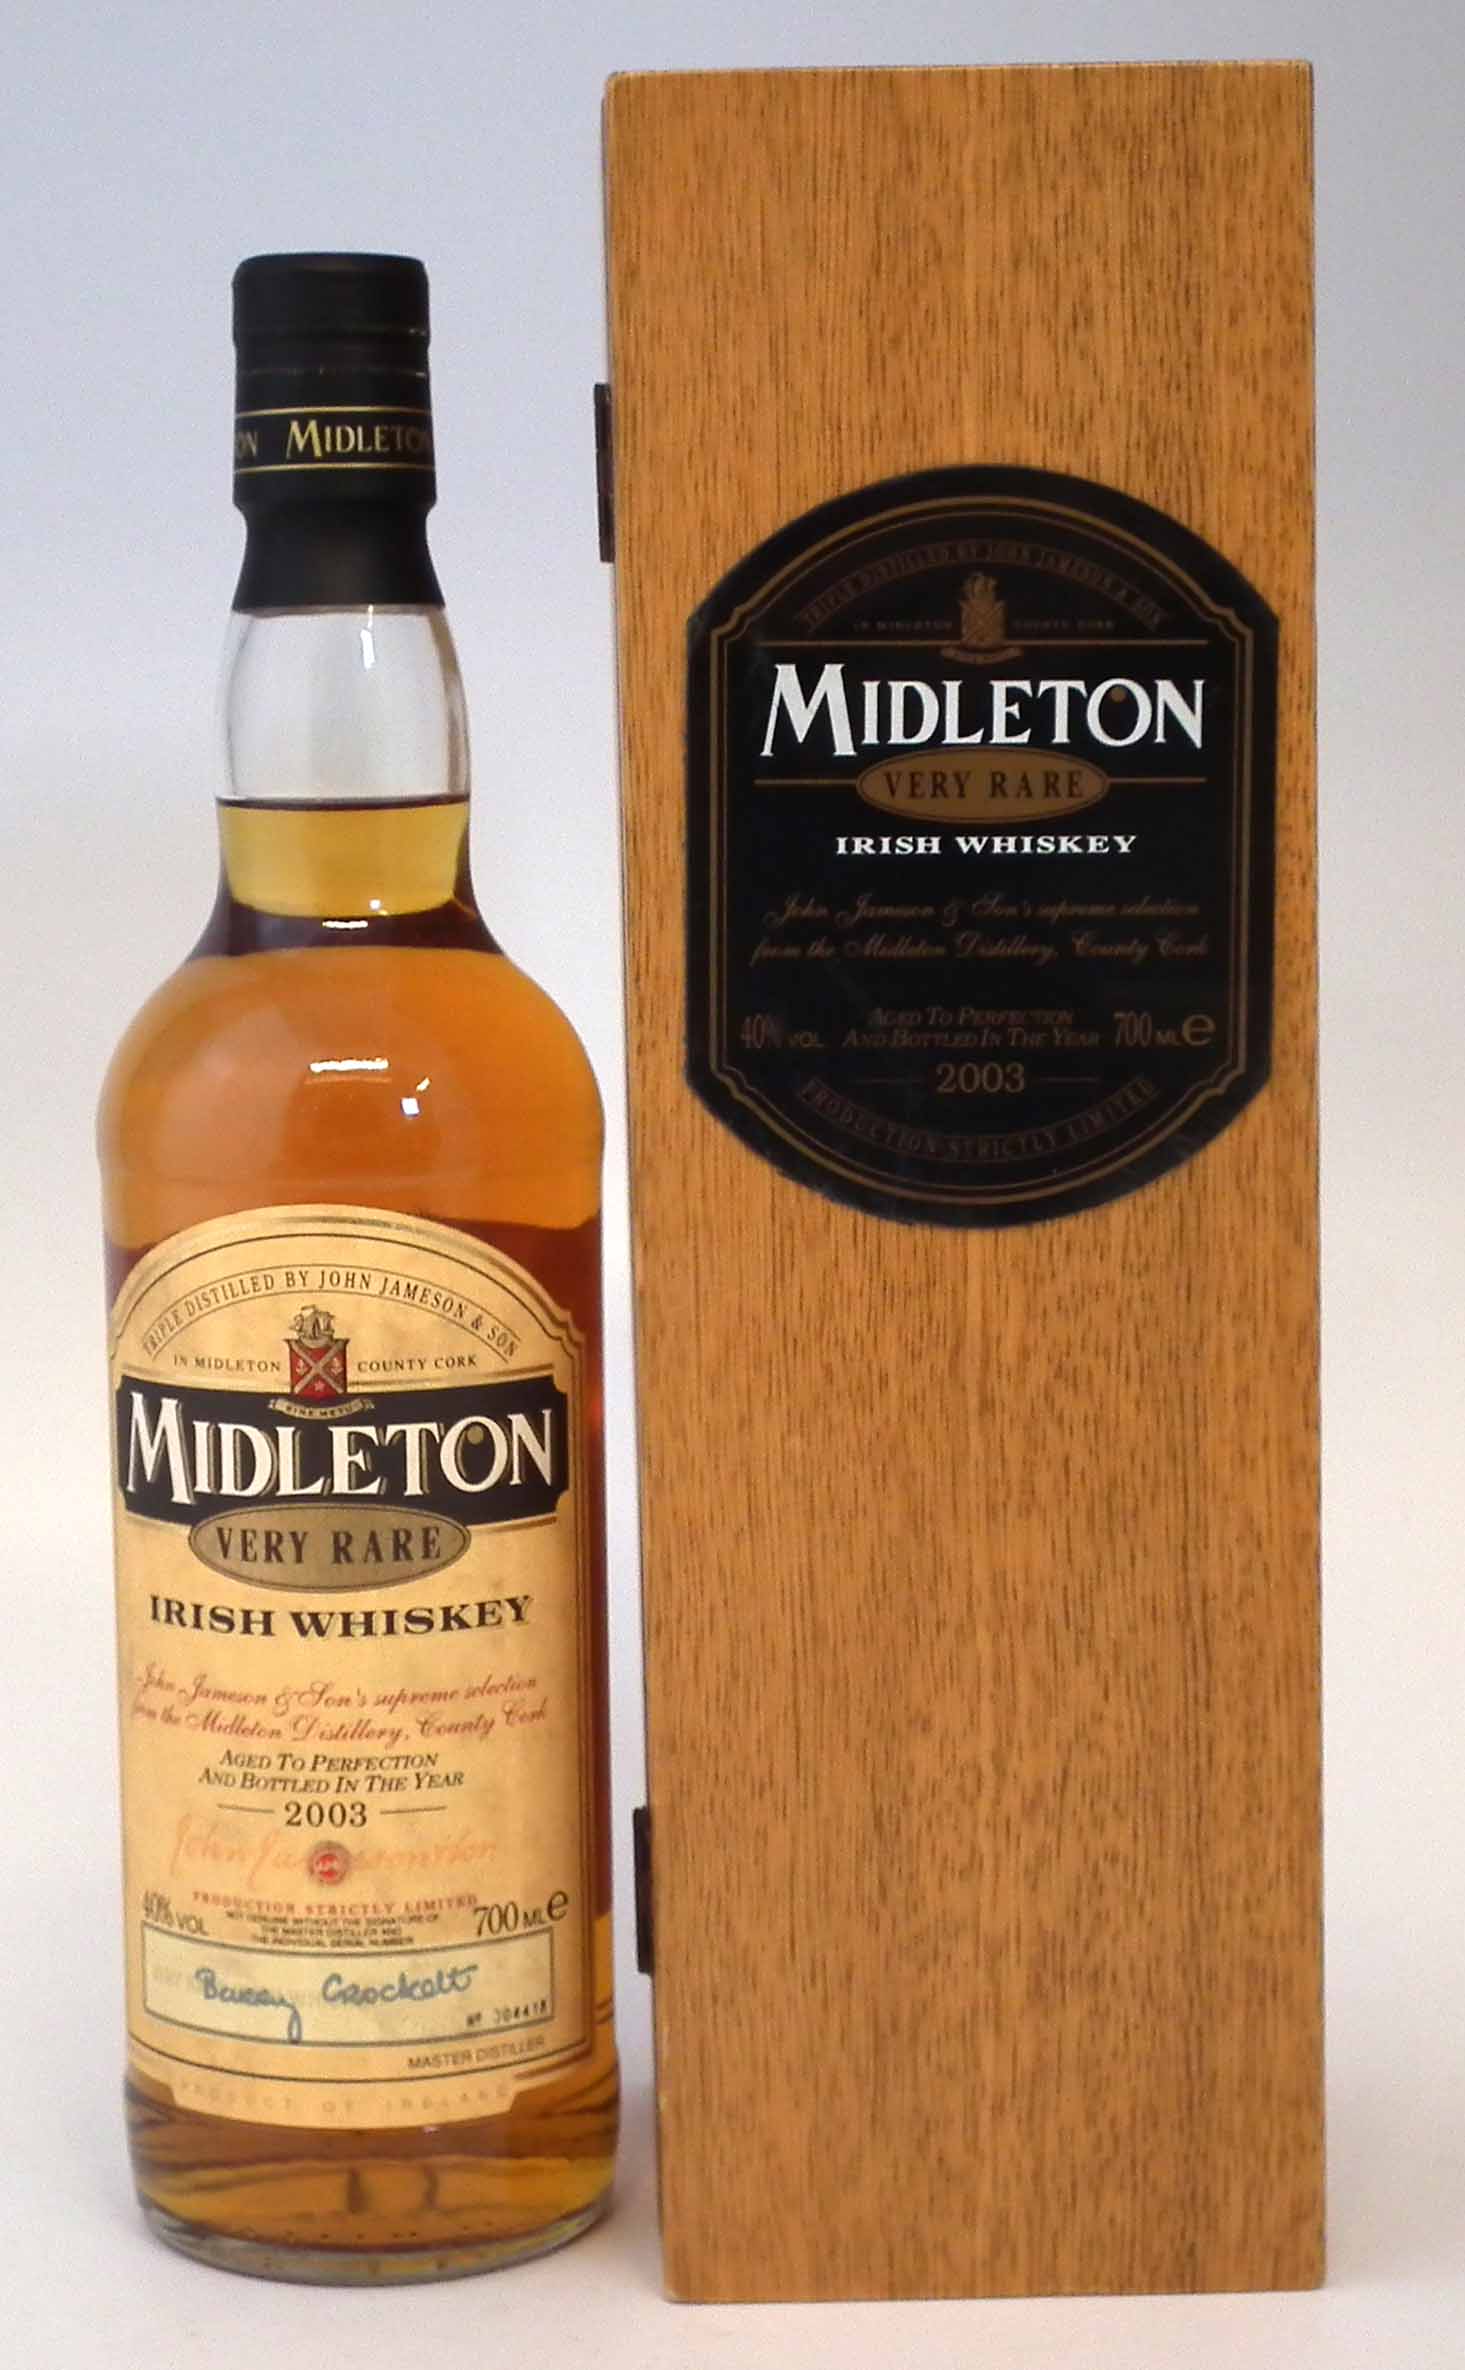 Midleton Very Rare Irish Whiskey - 2003 - 700ml number 4418 with wood box, certificate and